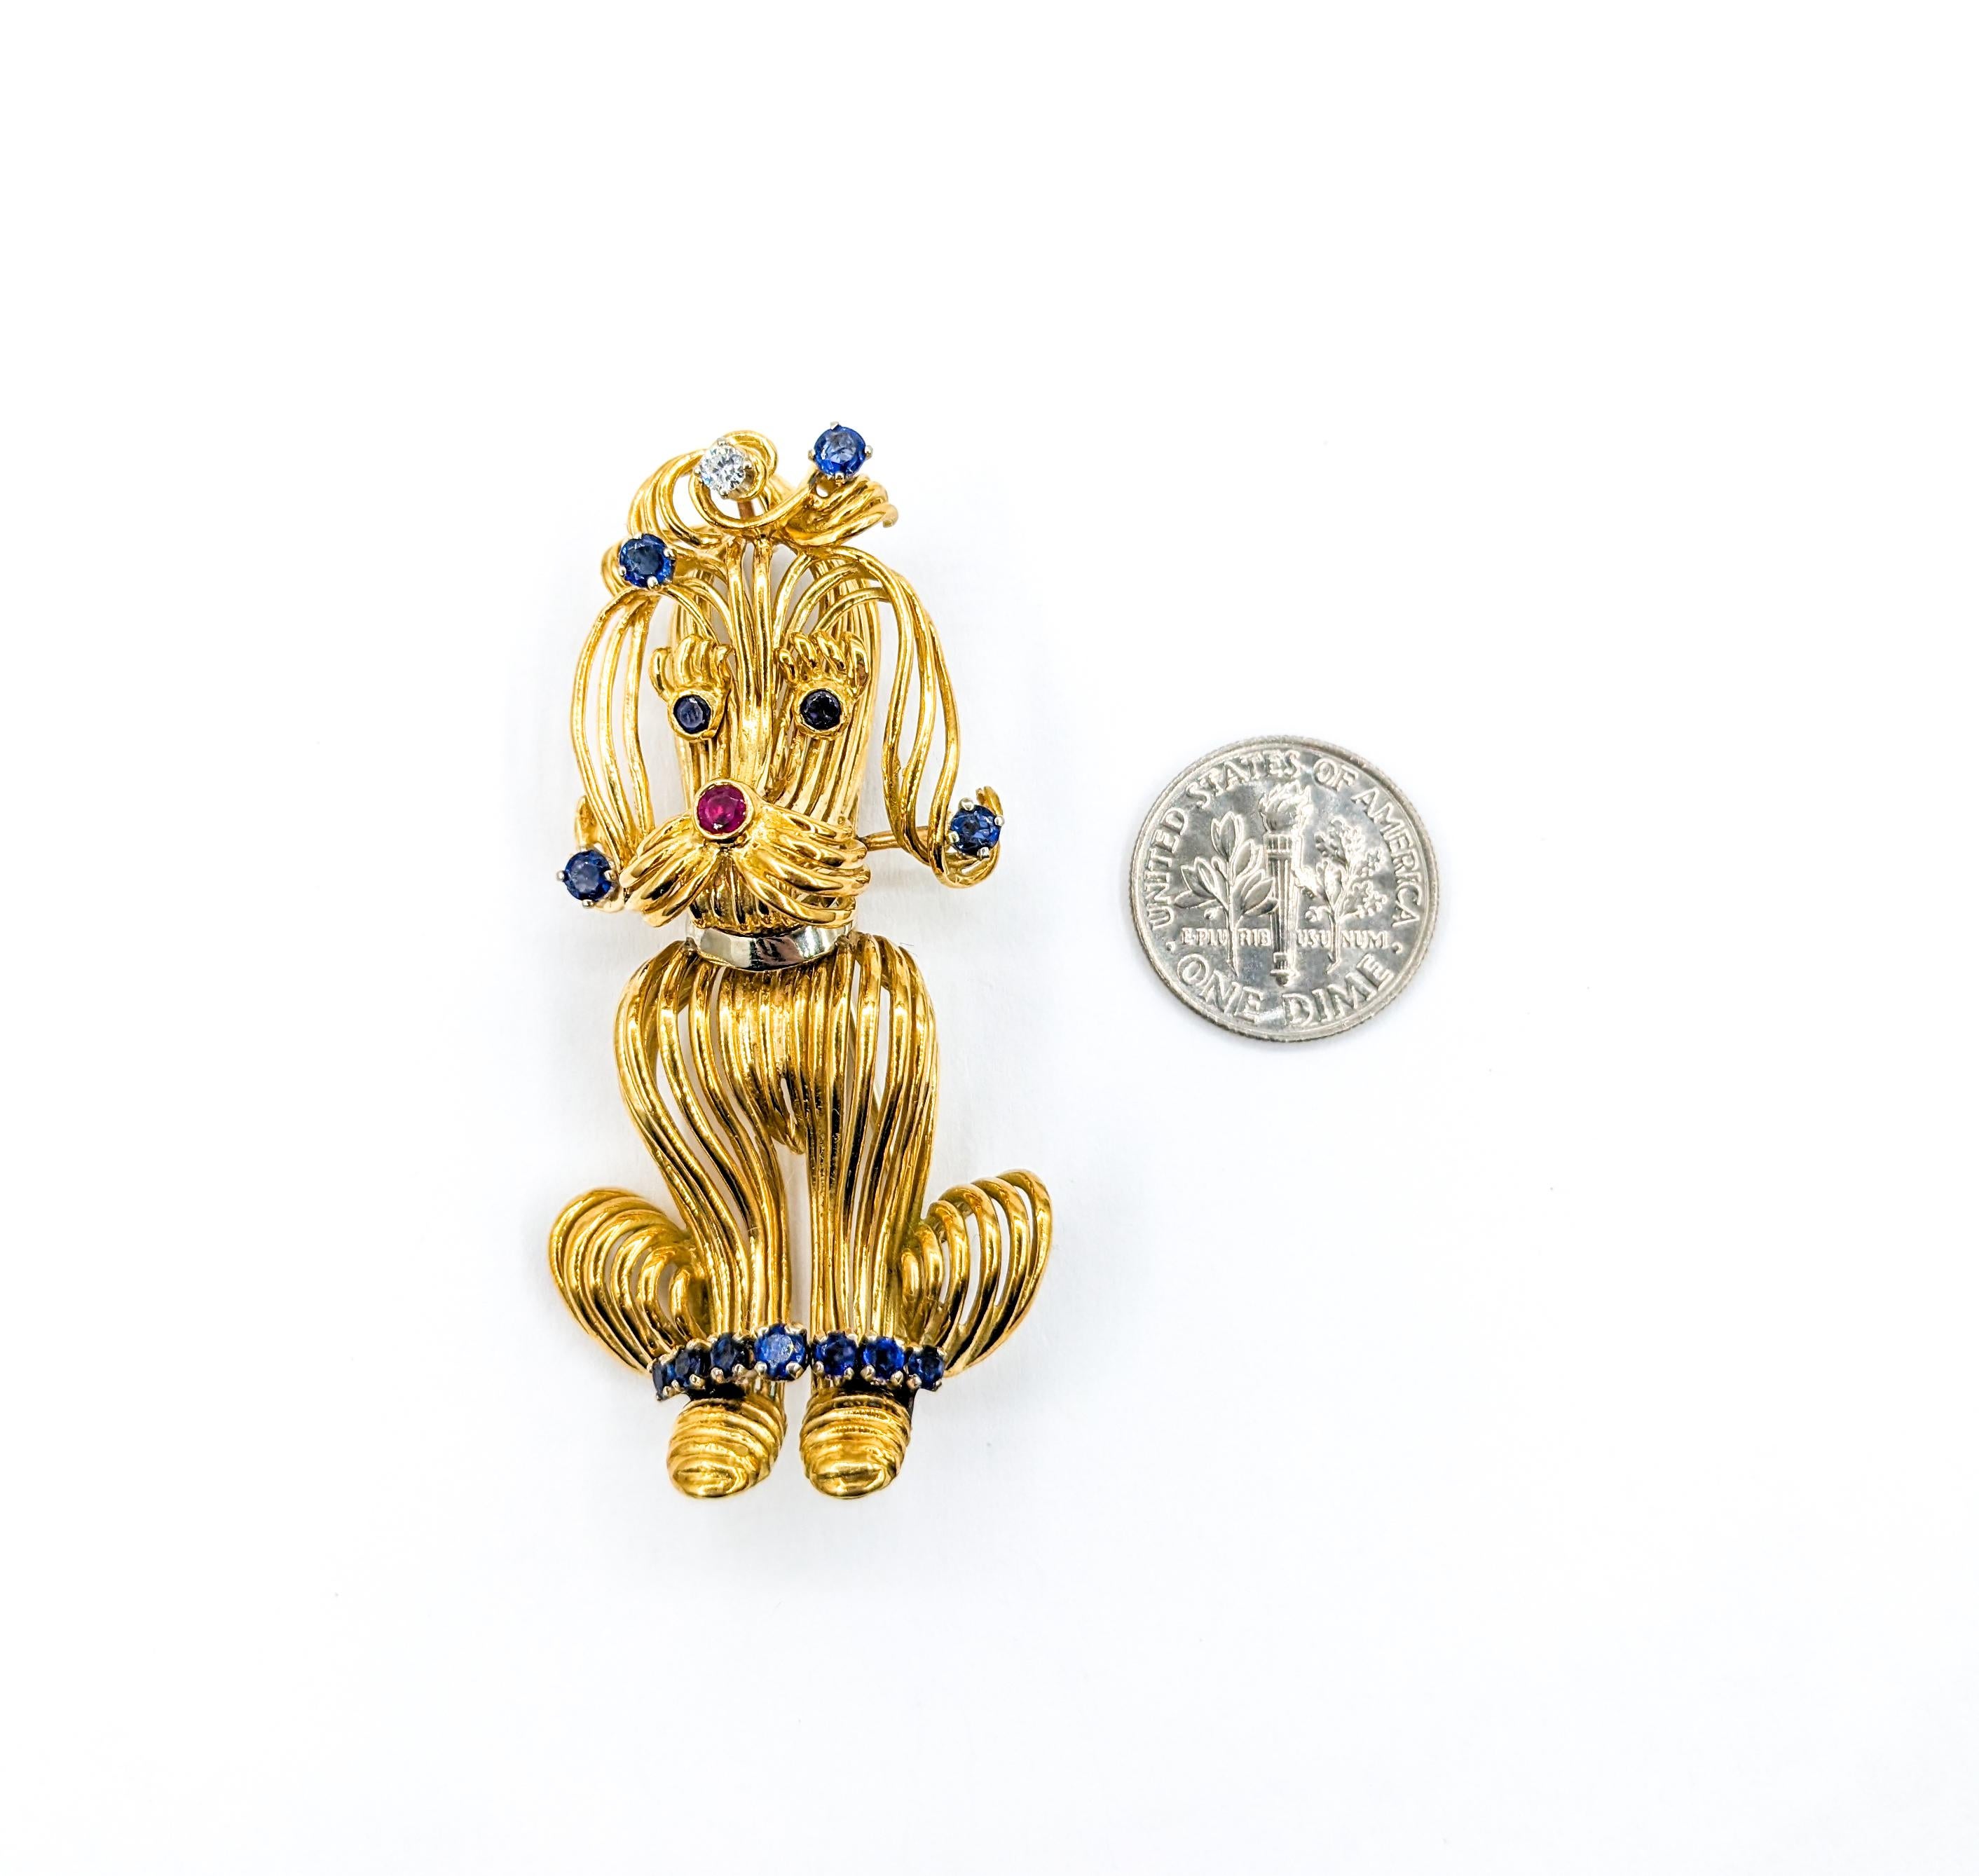 Darling Mid-Century Poodle Dog Brooch with Sapphires, Ruby & Diamonds in 18K Gold

Fall in love with this whimsical Vintage Poodle Brooch, meticulously designed in 18 karat yellow gold spaghetti style wire with gemstone details. Atop the Poodle's